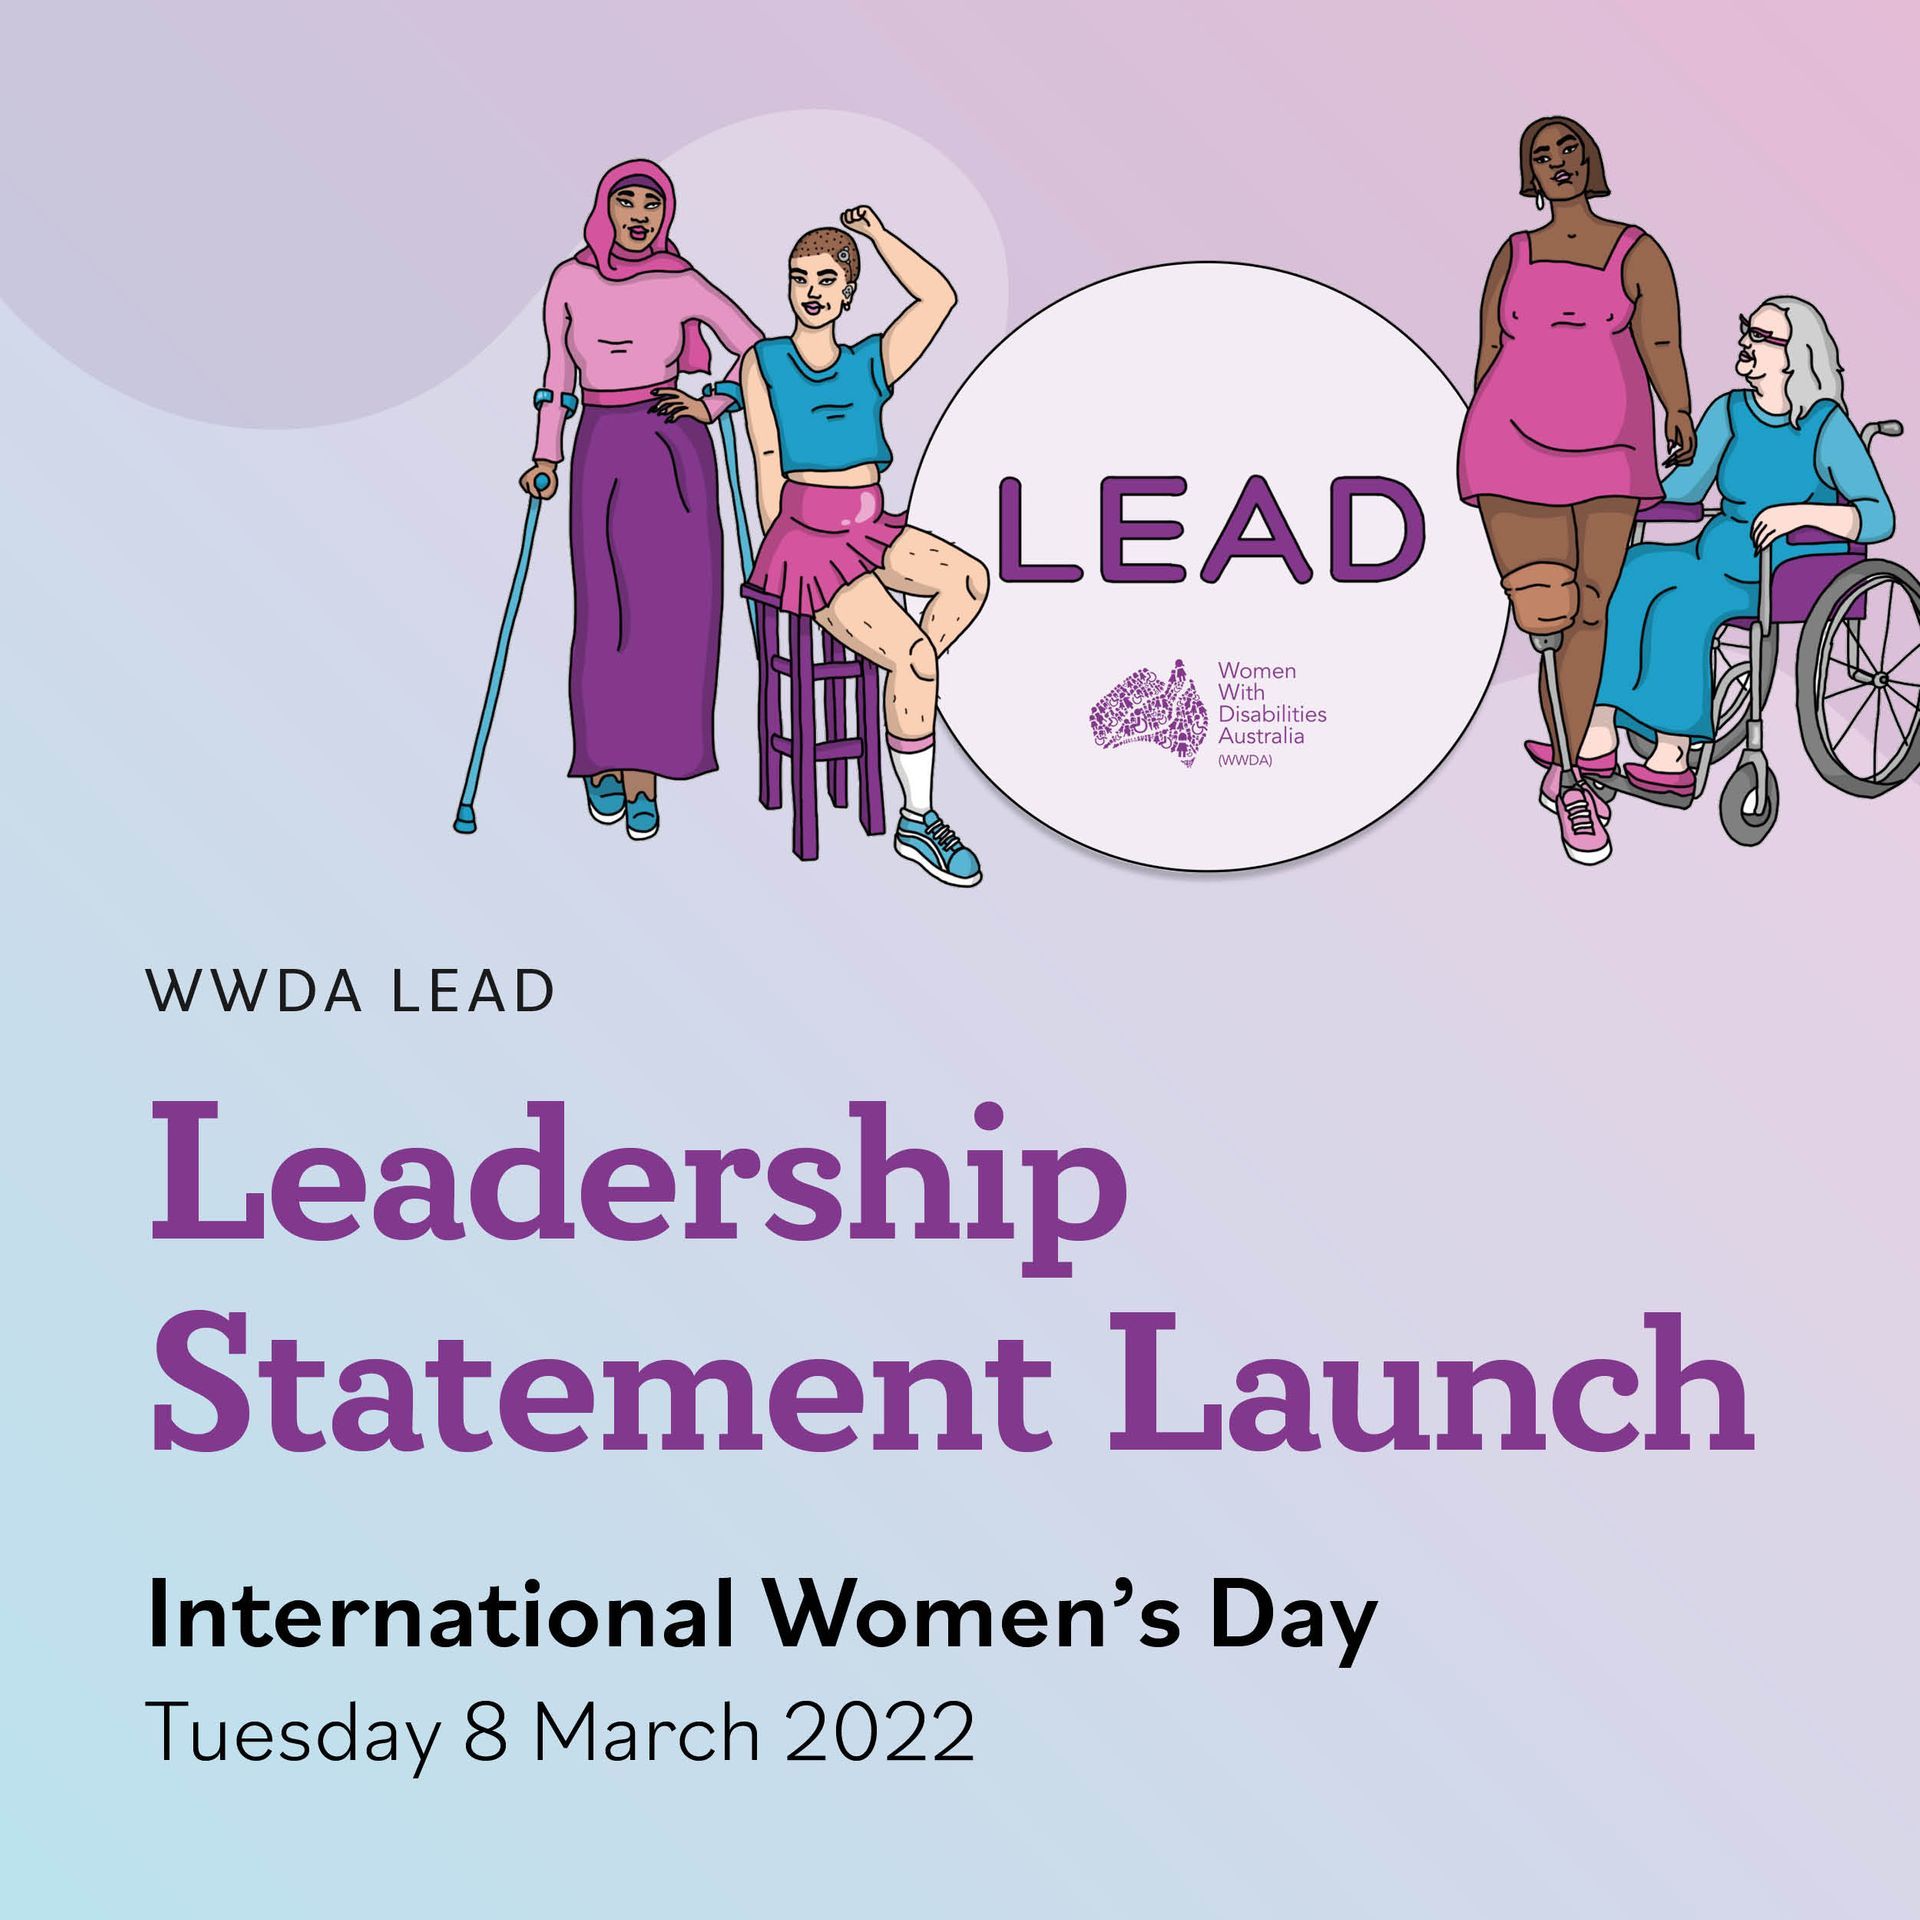 Background with pastel blue, purple and pinks. In the top left is the WWDA LEAD Project Logo: which is pale purple circle with text "LEAD" and the WWDA logo. Around the logo are two women representing diversity and different disabilities in colourful clothes. Main text reads: ‘WWDA LEAD. Leadership Statement Launch. International Women’s Day. Tuesday 8 March 2022.’